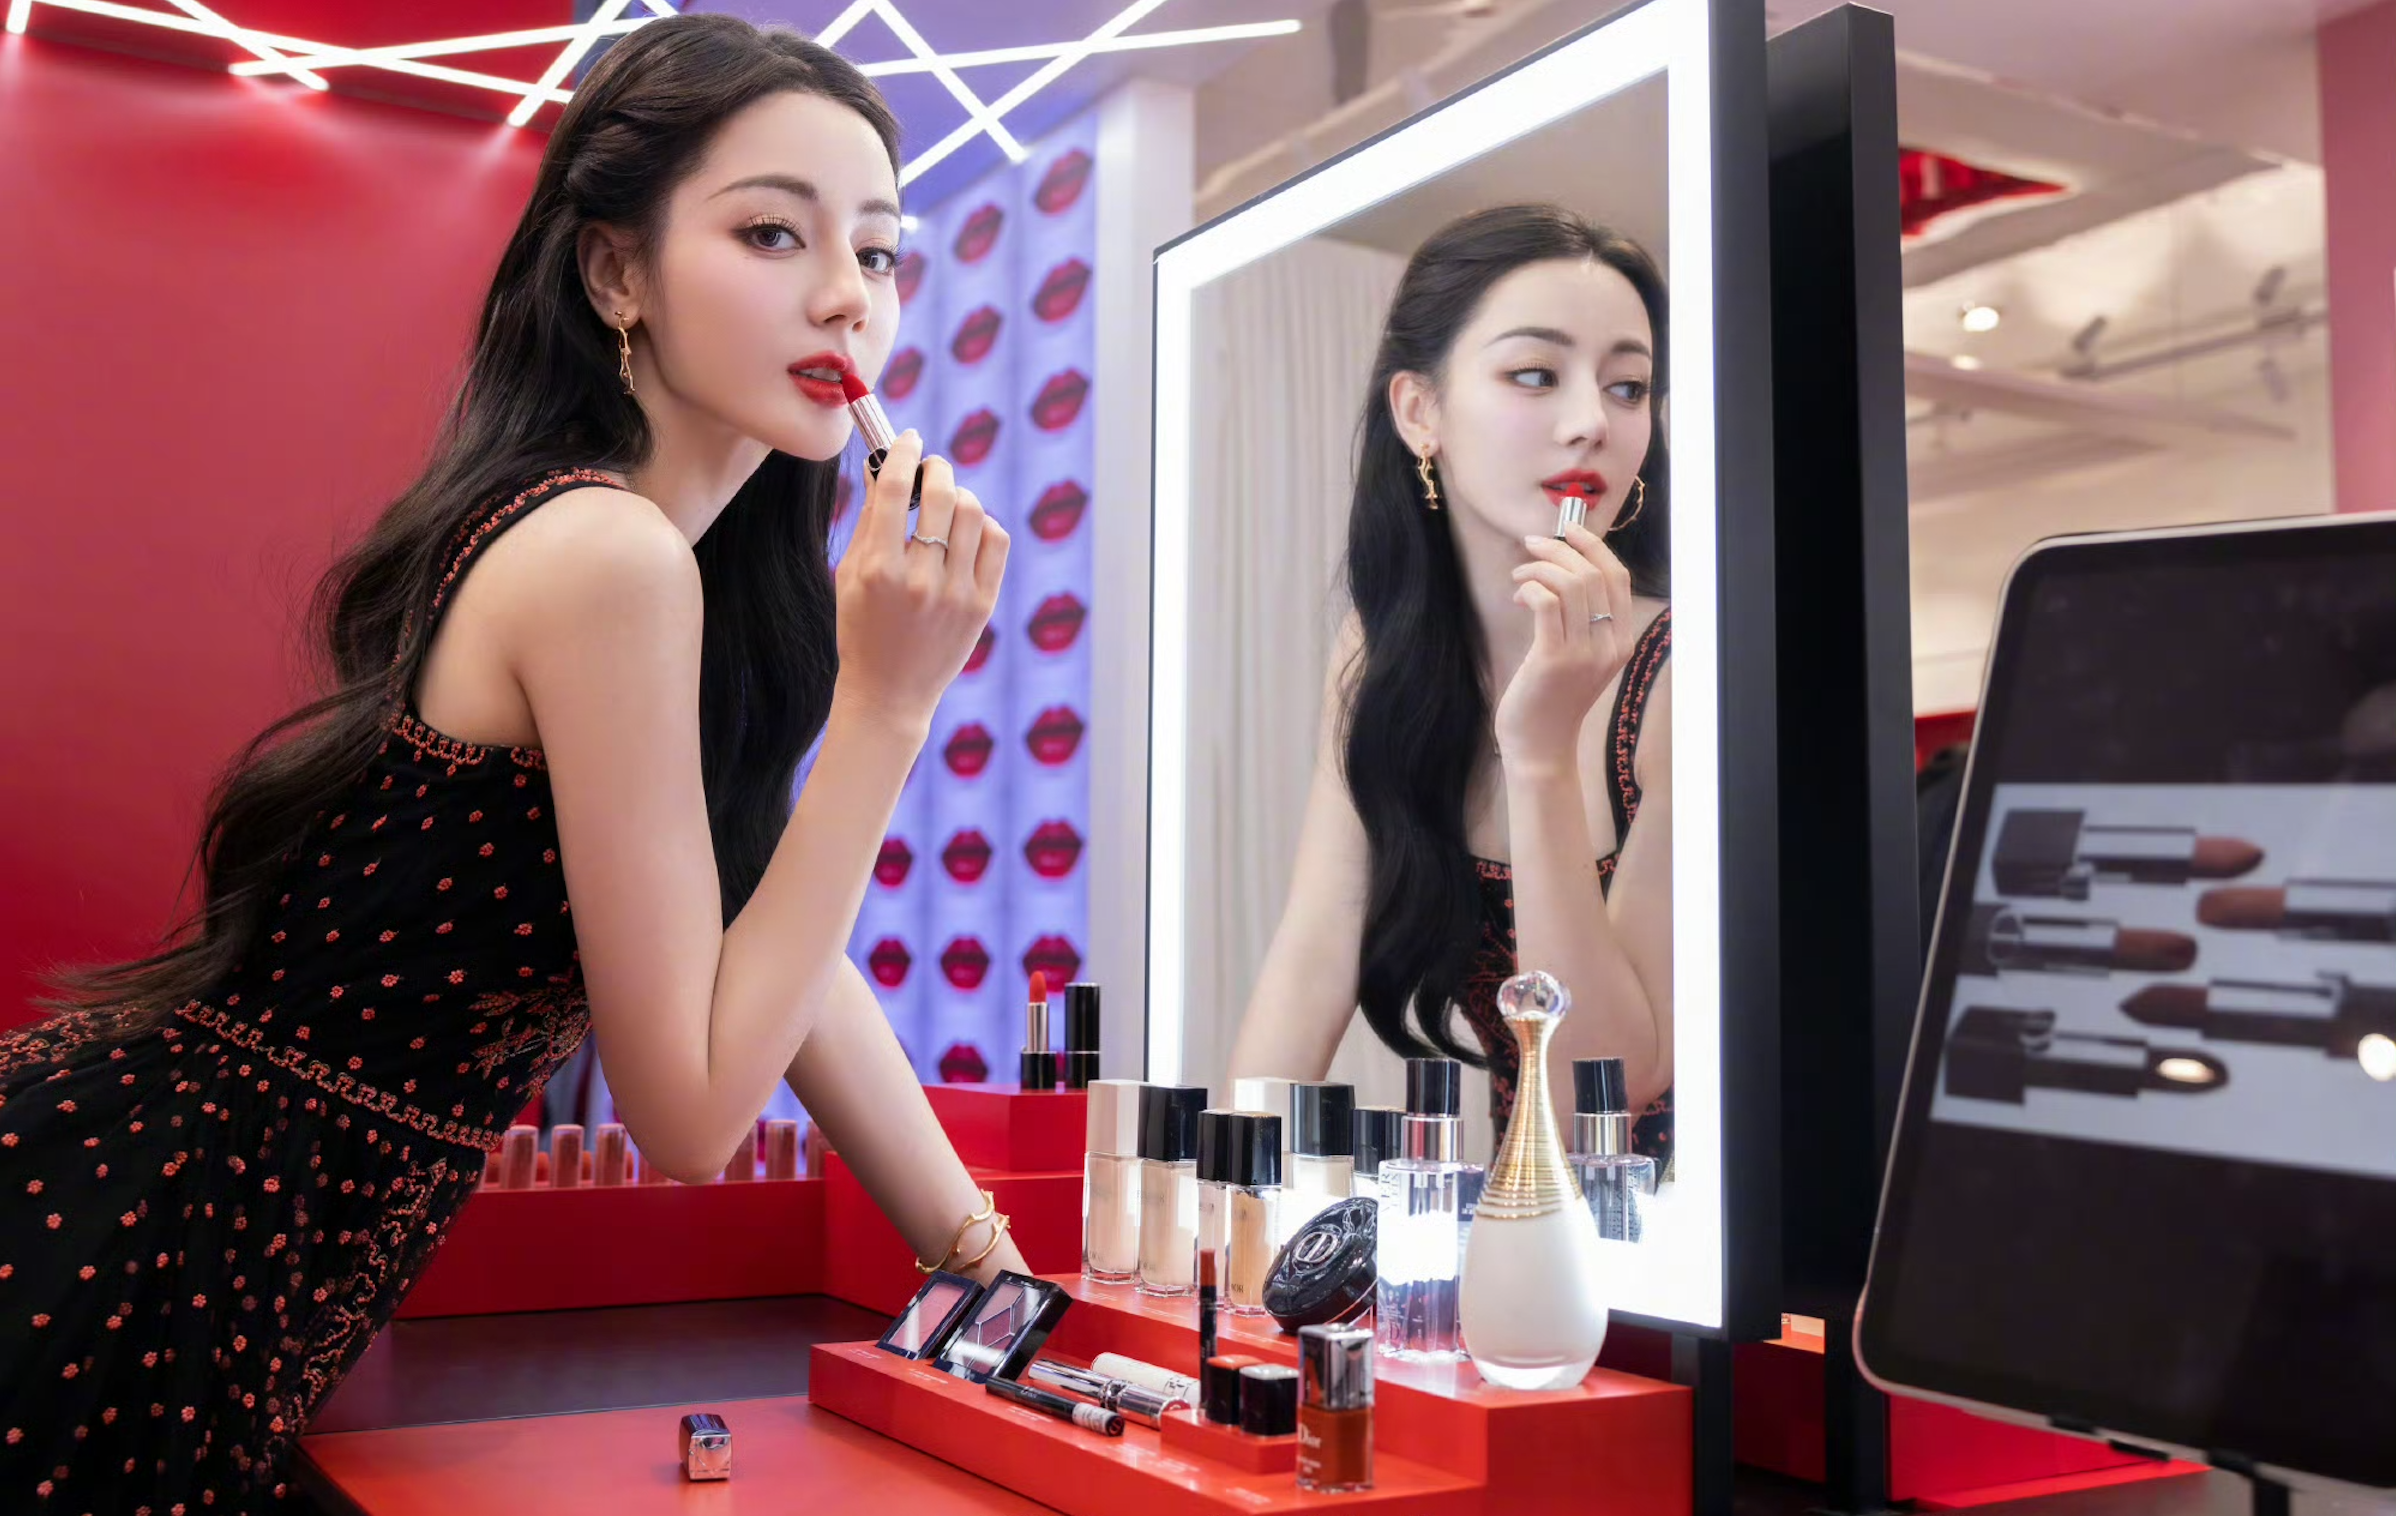 Dior claimed second spot on WeArisma’s beauty leaderboard thanks to Chinese actress and singer Dilraba Dilmurat. Image: WeArsma